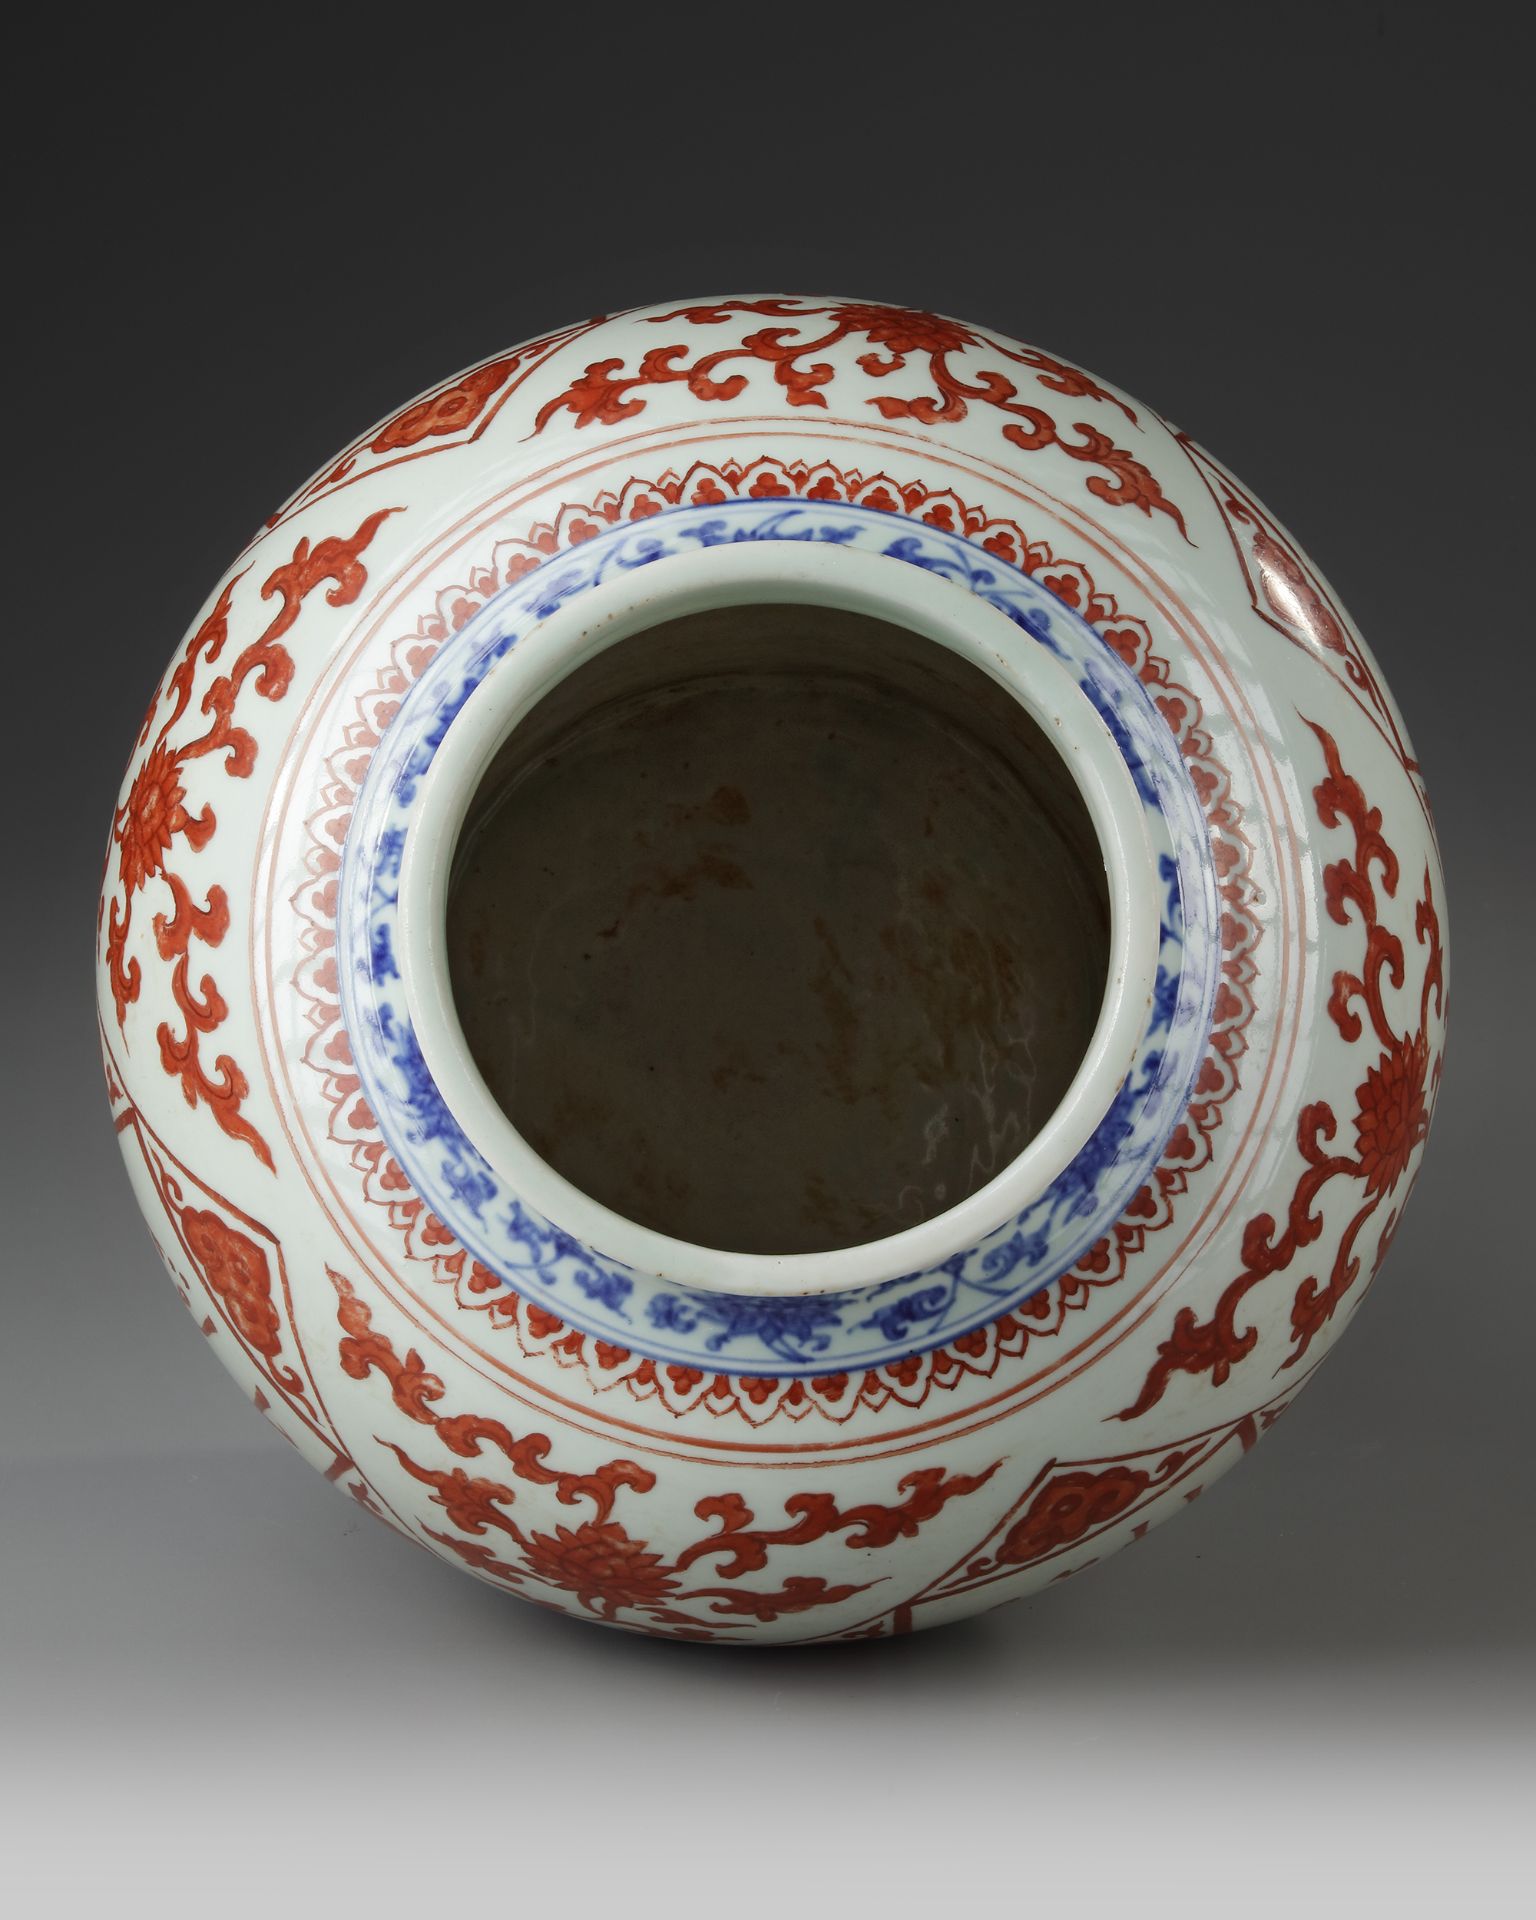 A CHINESE BLUE AND COPPER RED DECORATED ISLAMIC-MARKET JAR, MING DYNASTY (1368-1644) OR LATER - Image 3 of 4